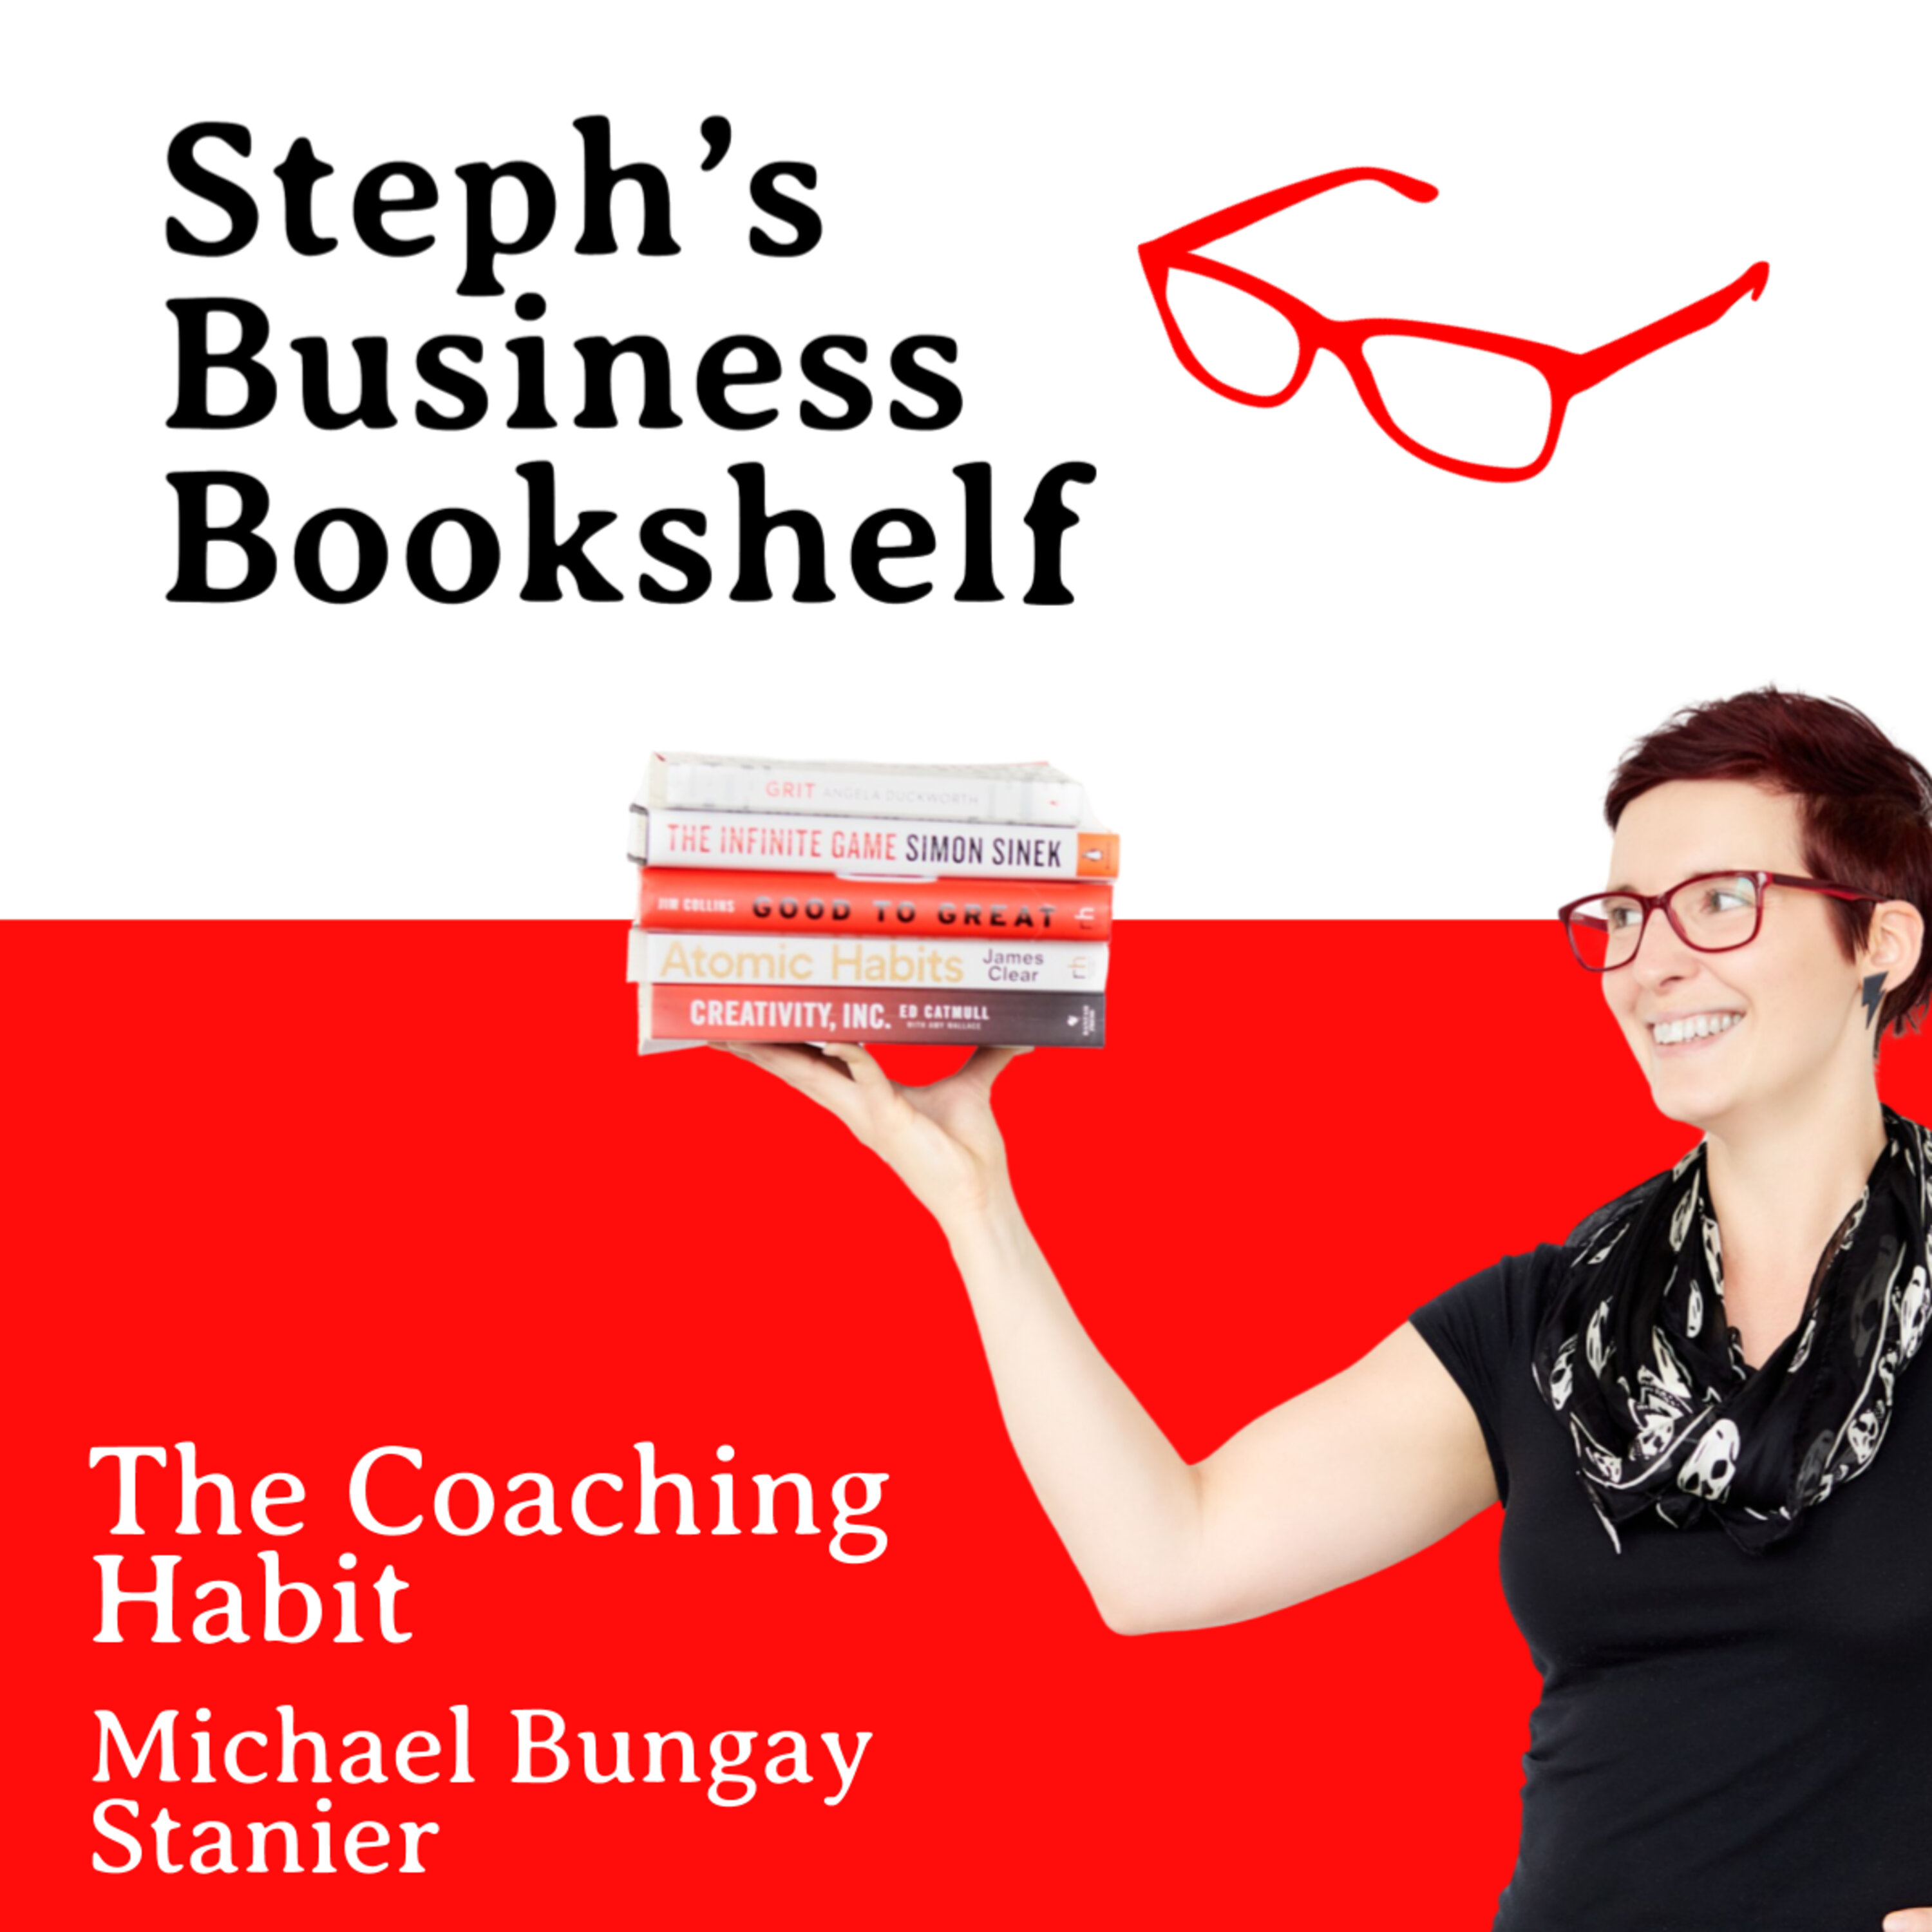 The Coaching Habit by Michael Bungay Stanier: How to unlock the most powerful leadership skill Image